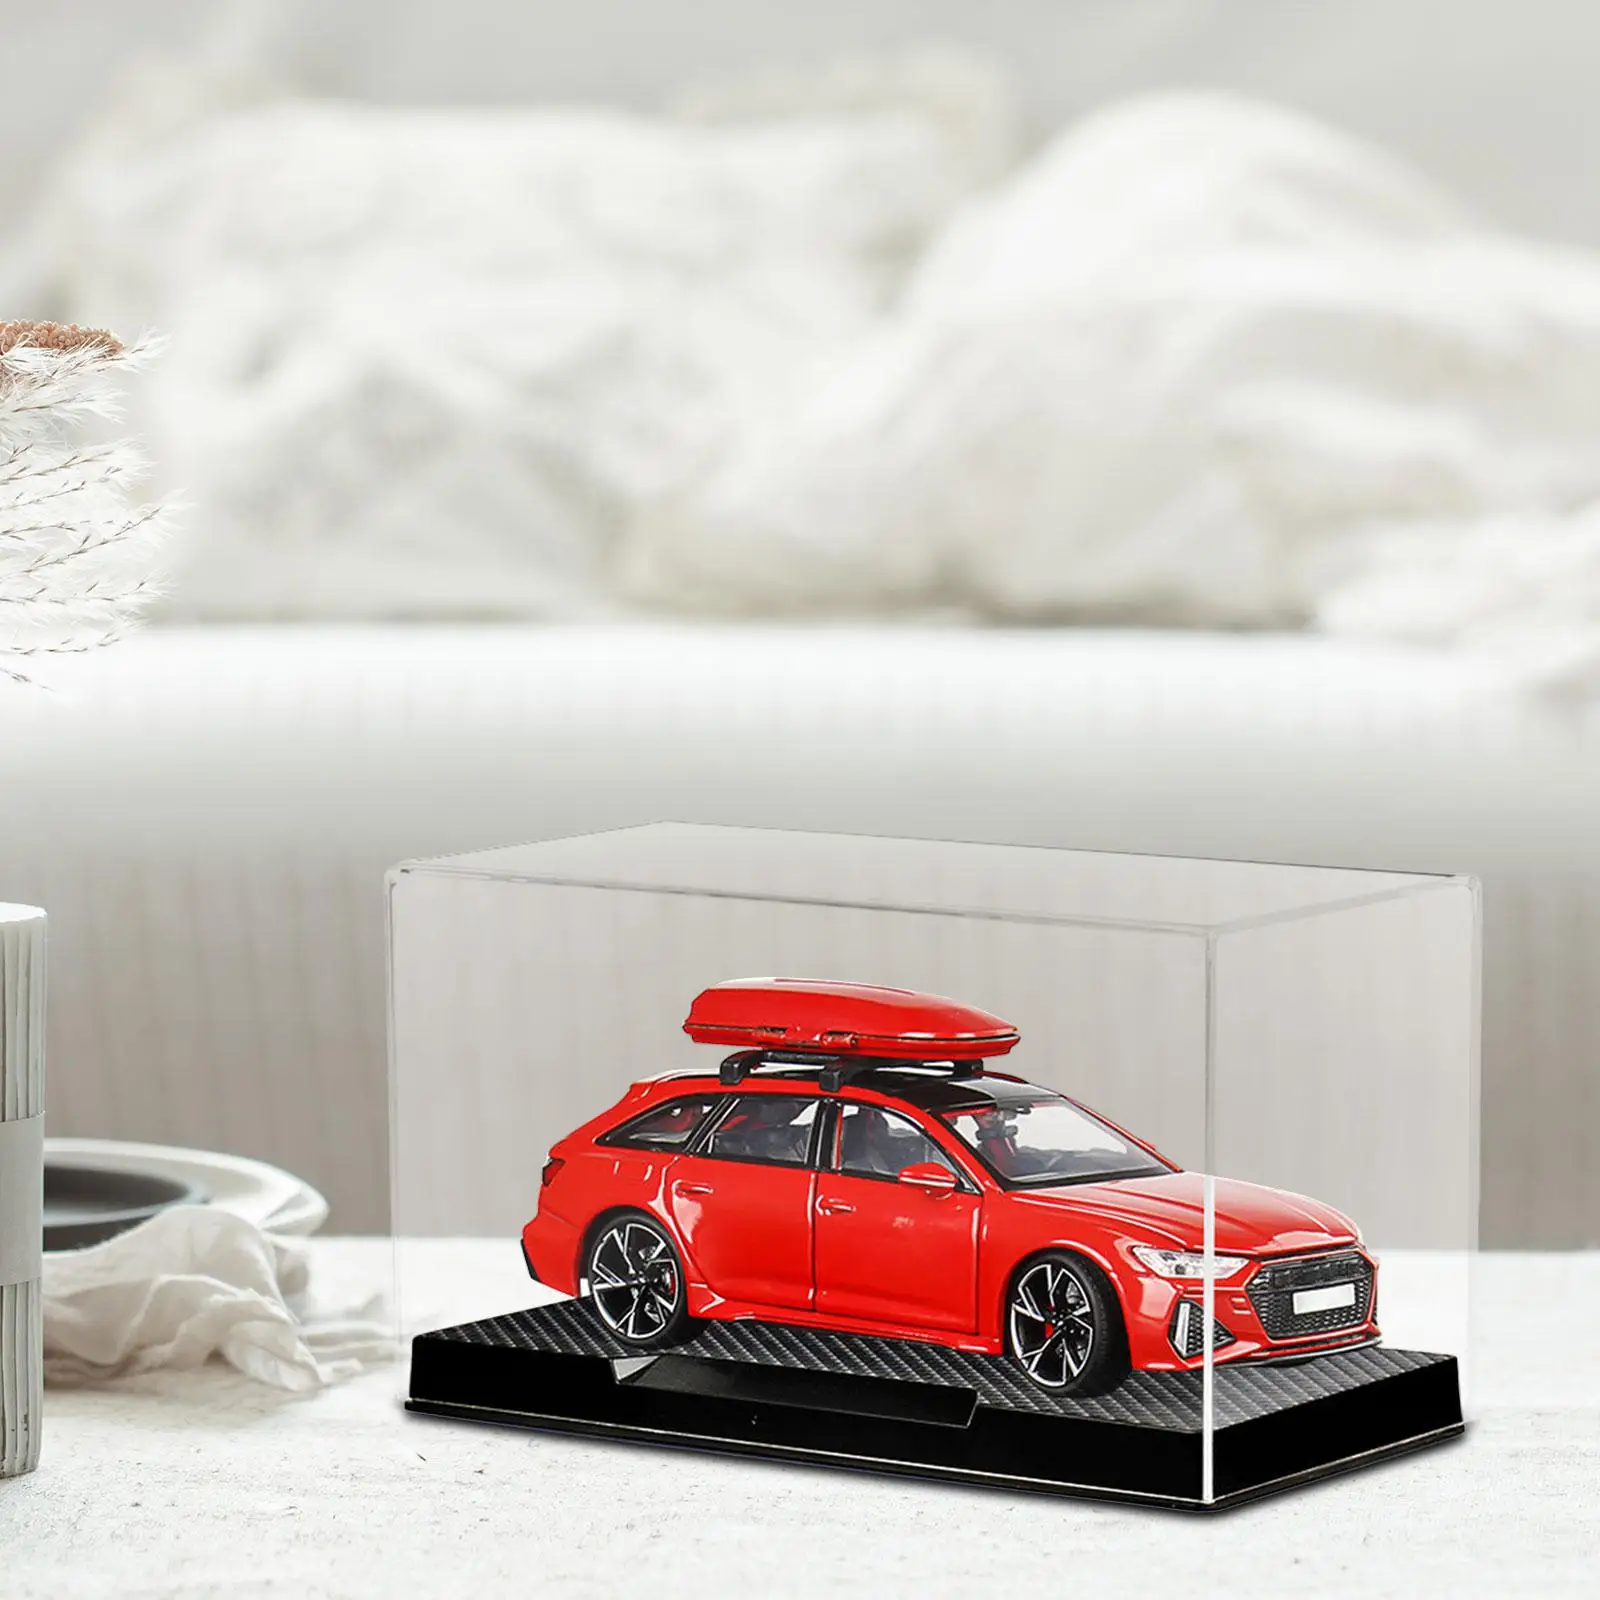 Clear Acrylic Display Case 1:32 Scale Model Cars Showcase for Model Cars Boy